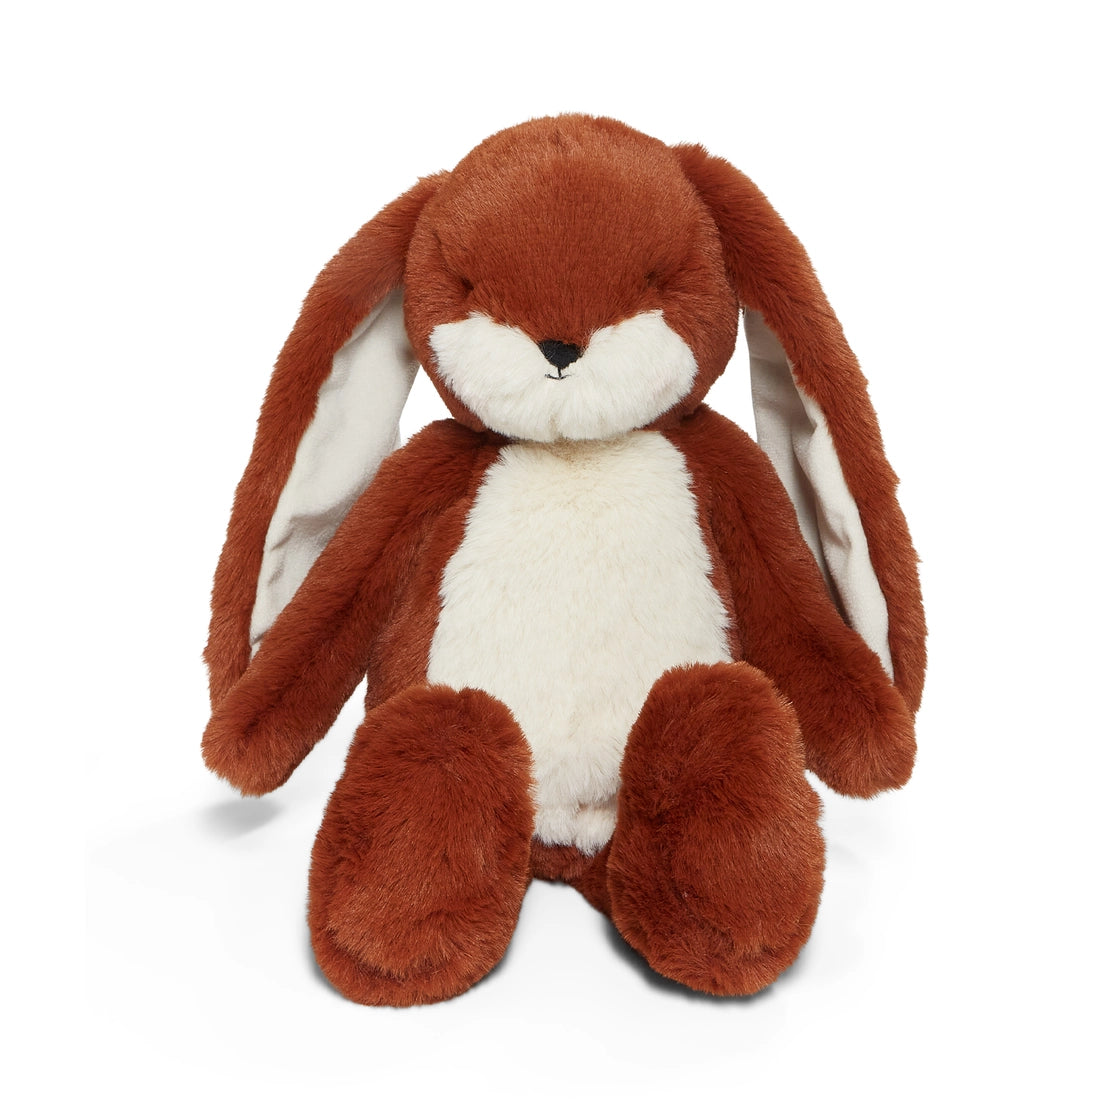 Little Nibble Floppy Bunny (Assorted Colors!) - Magpies Paducah